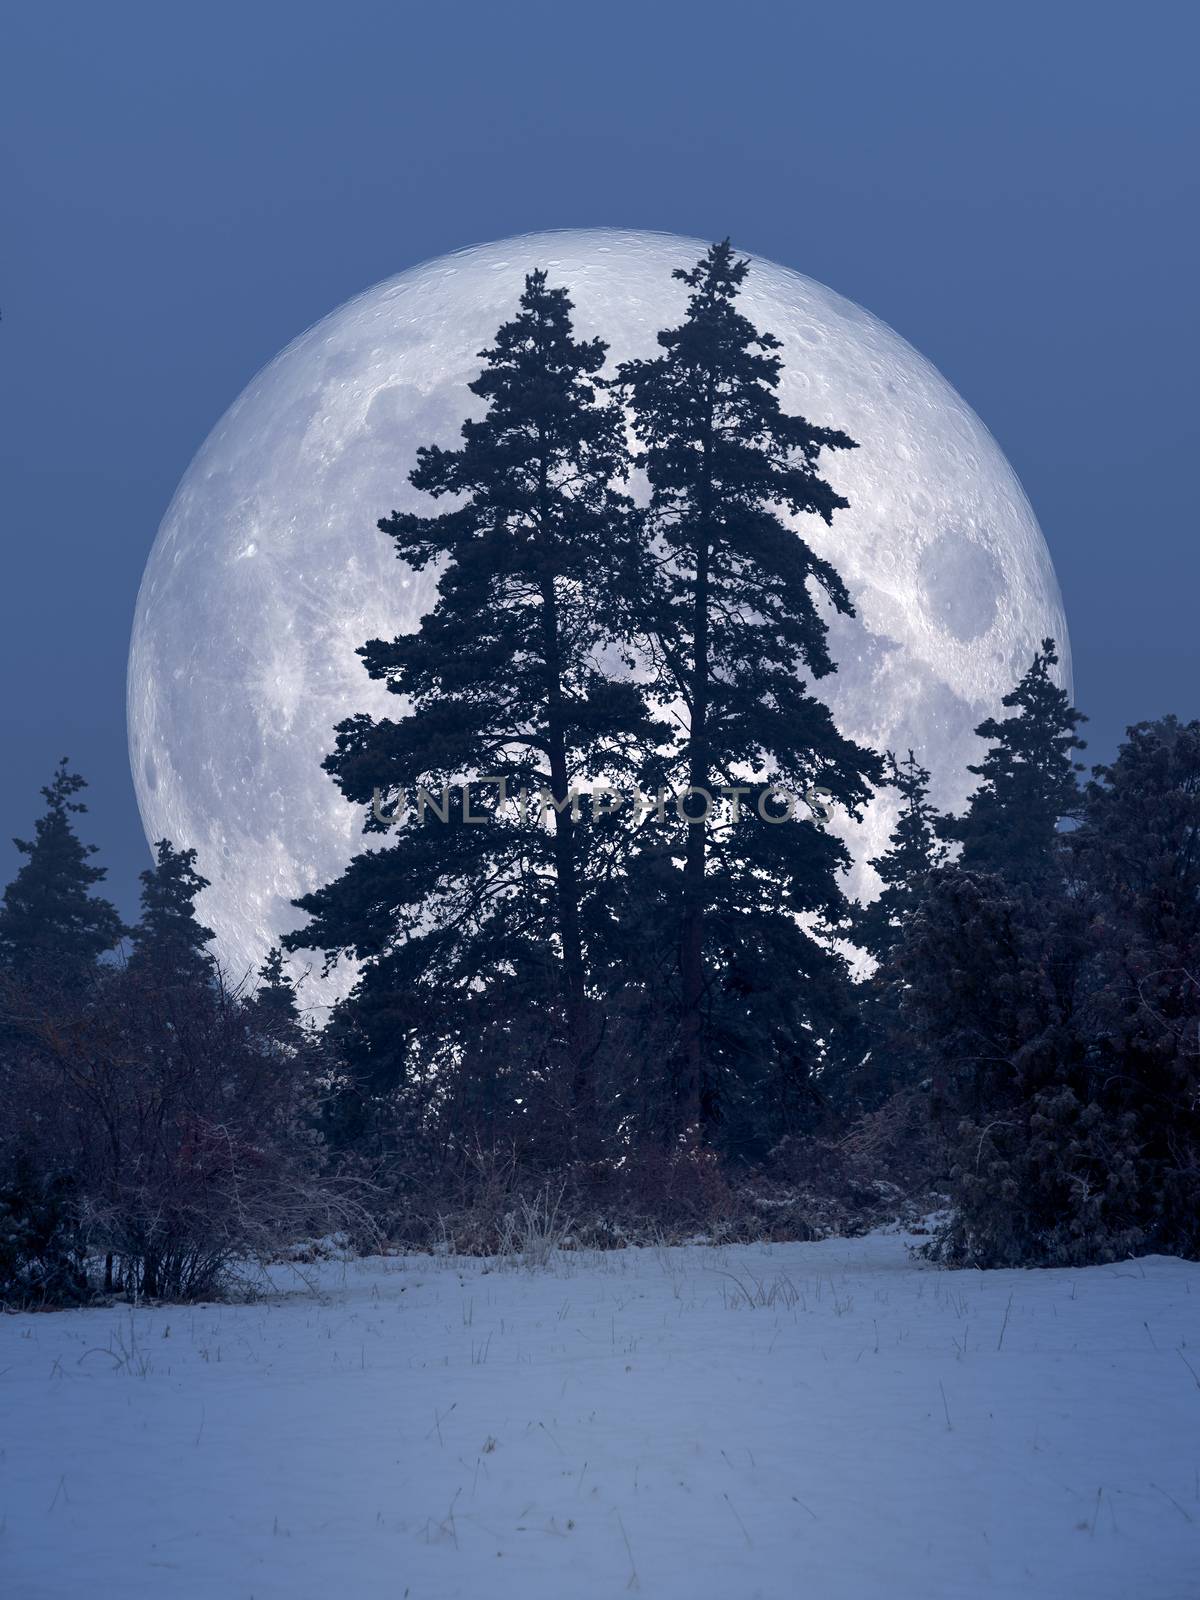 An image of a winter scenery night with full moon